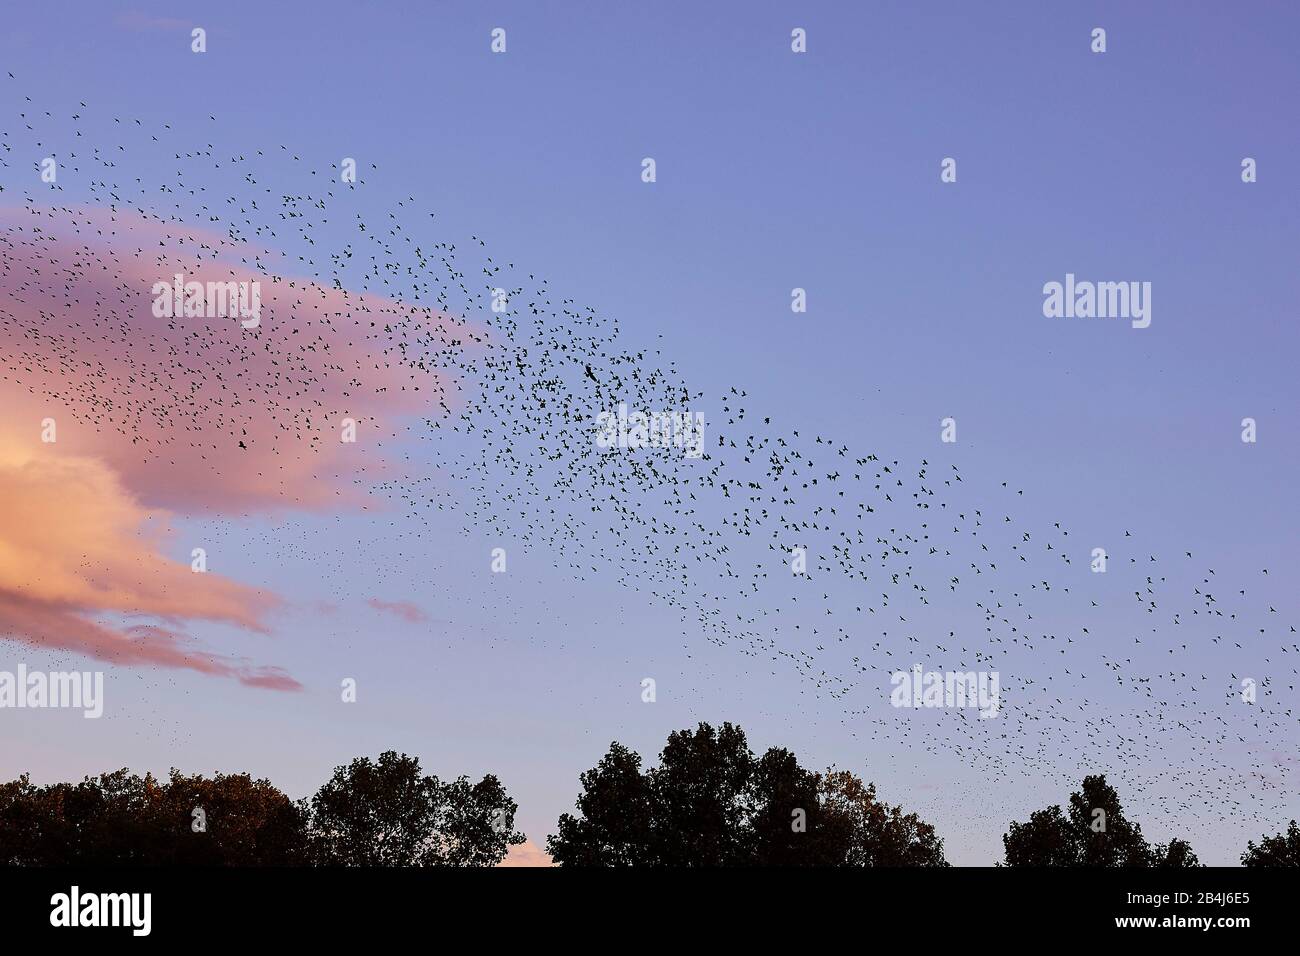 A flock of birds in the sky, on the left a pink cloud Stock Photo